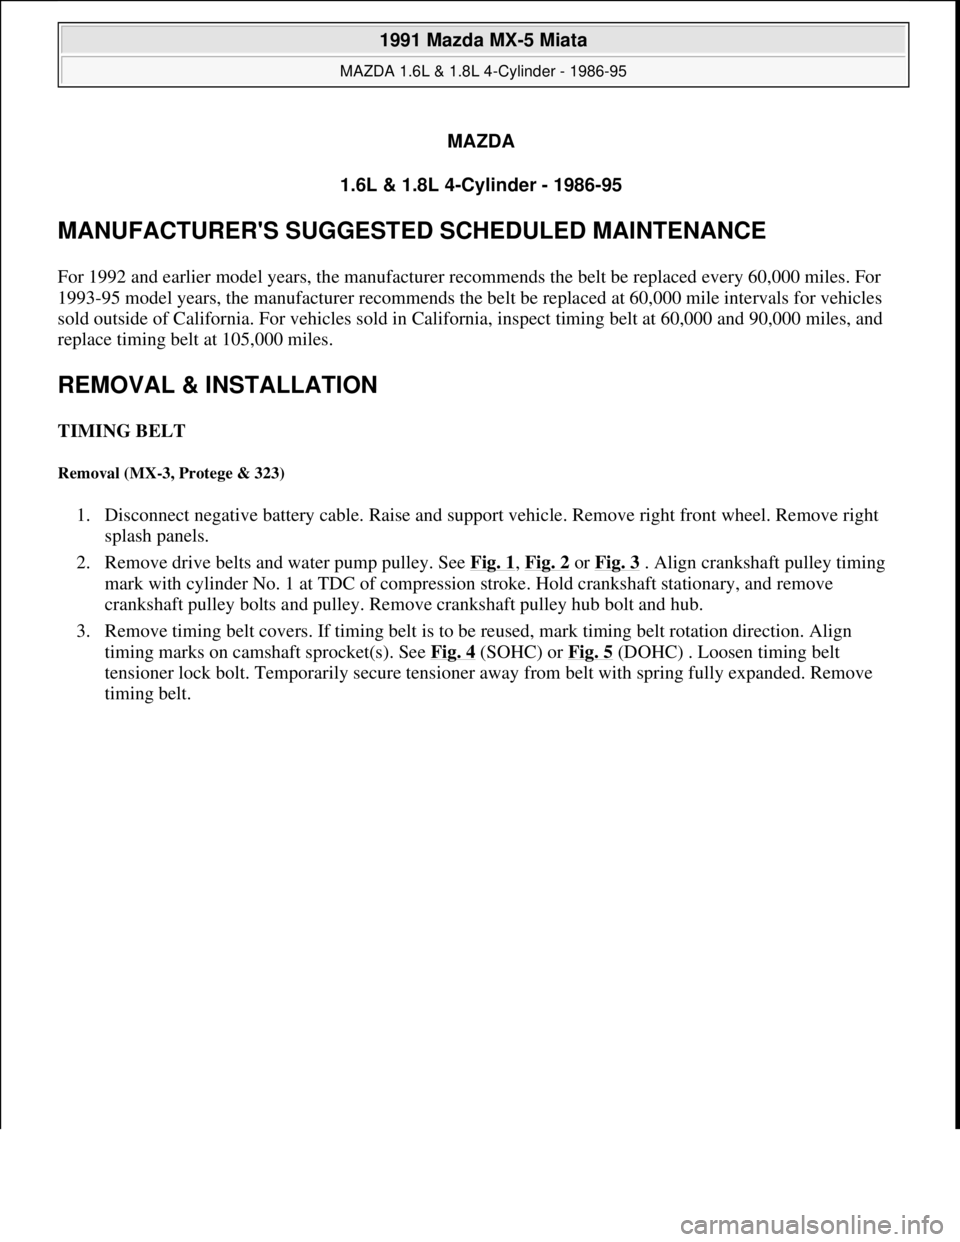 MAZDA MIATA 1991  Factory Service Manual MAZDA
1.6L & 1.8L 4-Cylinder - 1986-95 
MANUFACTURERS SUGGESTED SCHEDULED MAINTENANCE 
For 1992 and earlier model years, the manufacturer recommends the belt be replaced every 60,000 miles. For 
1993